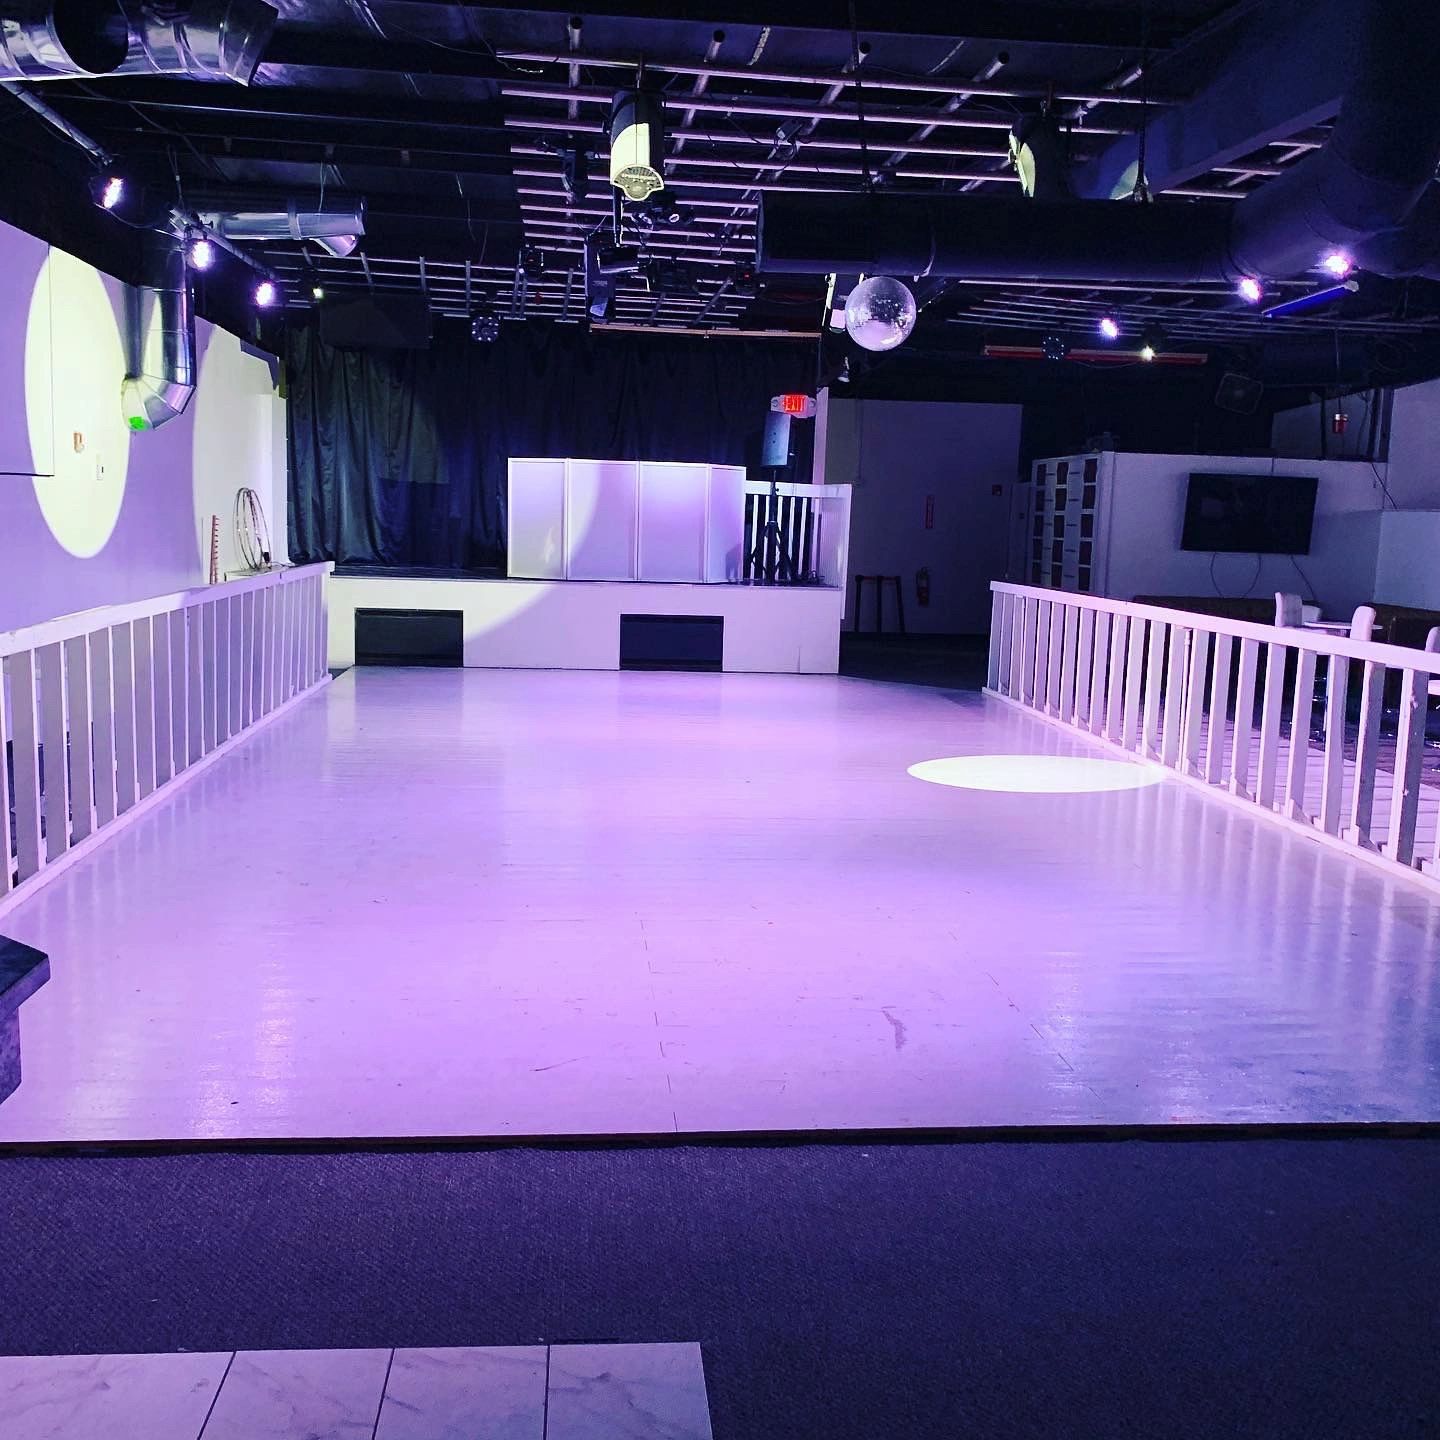 This is our huge dance floor and stage